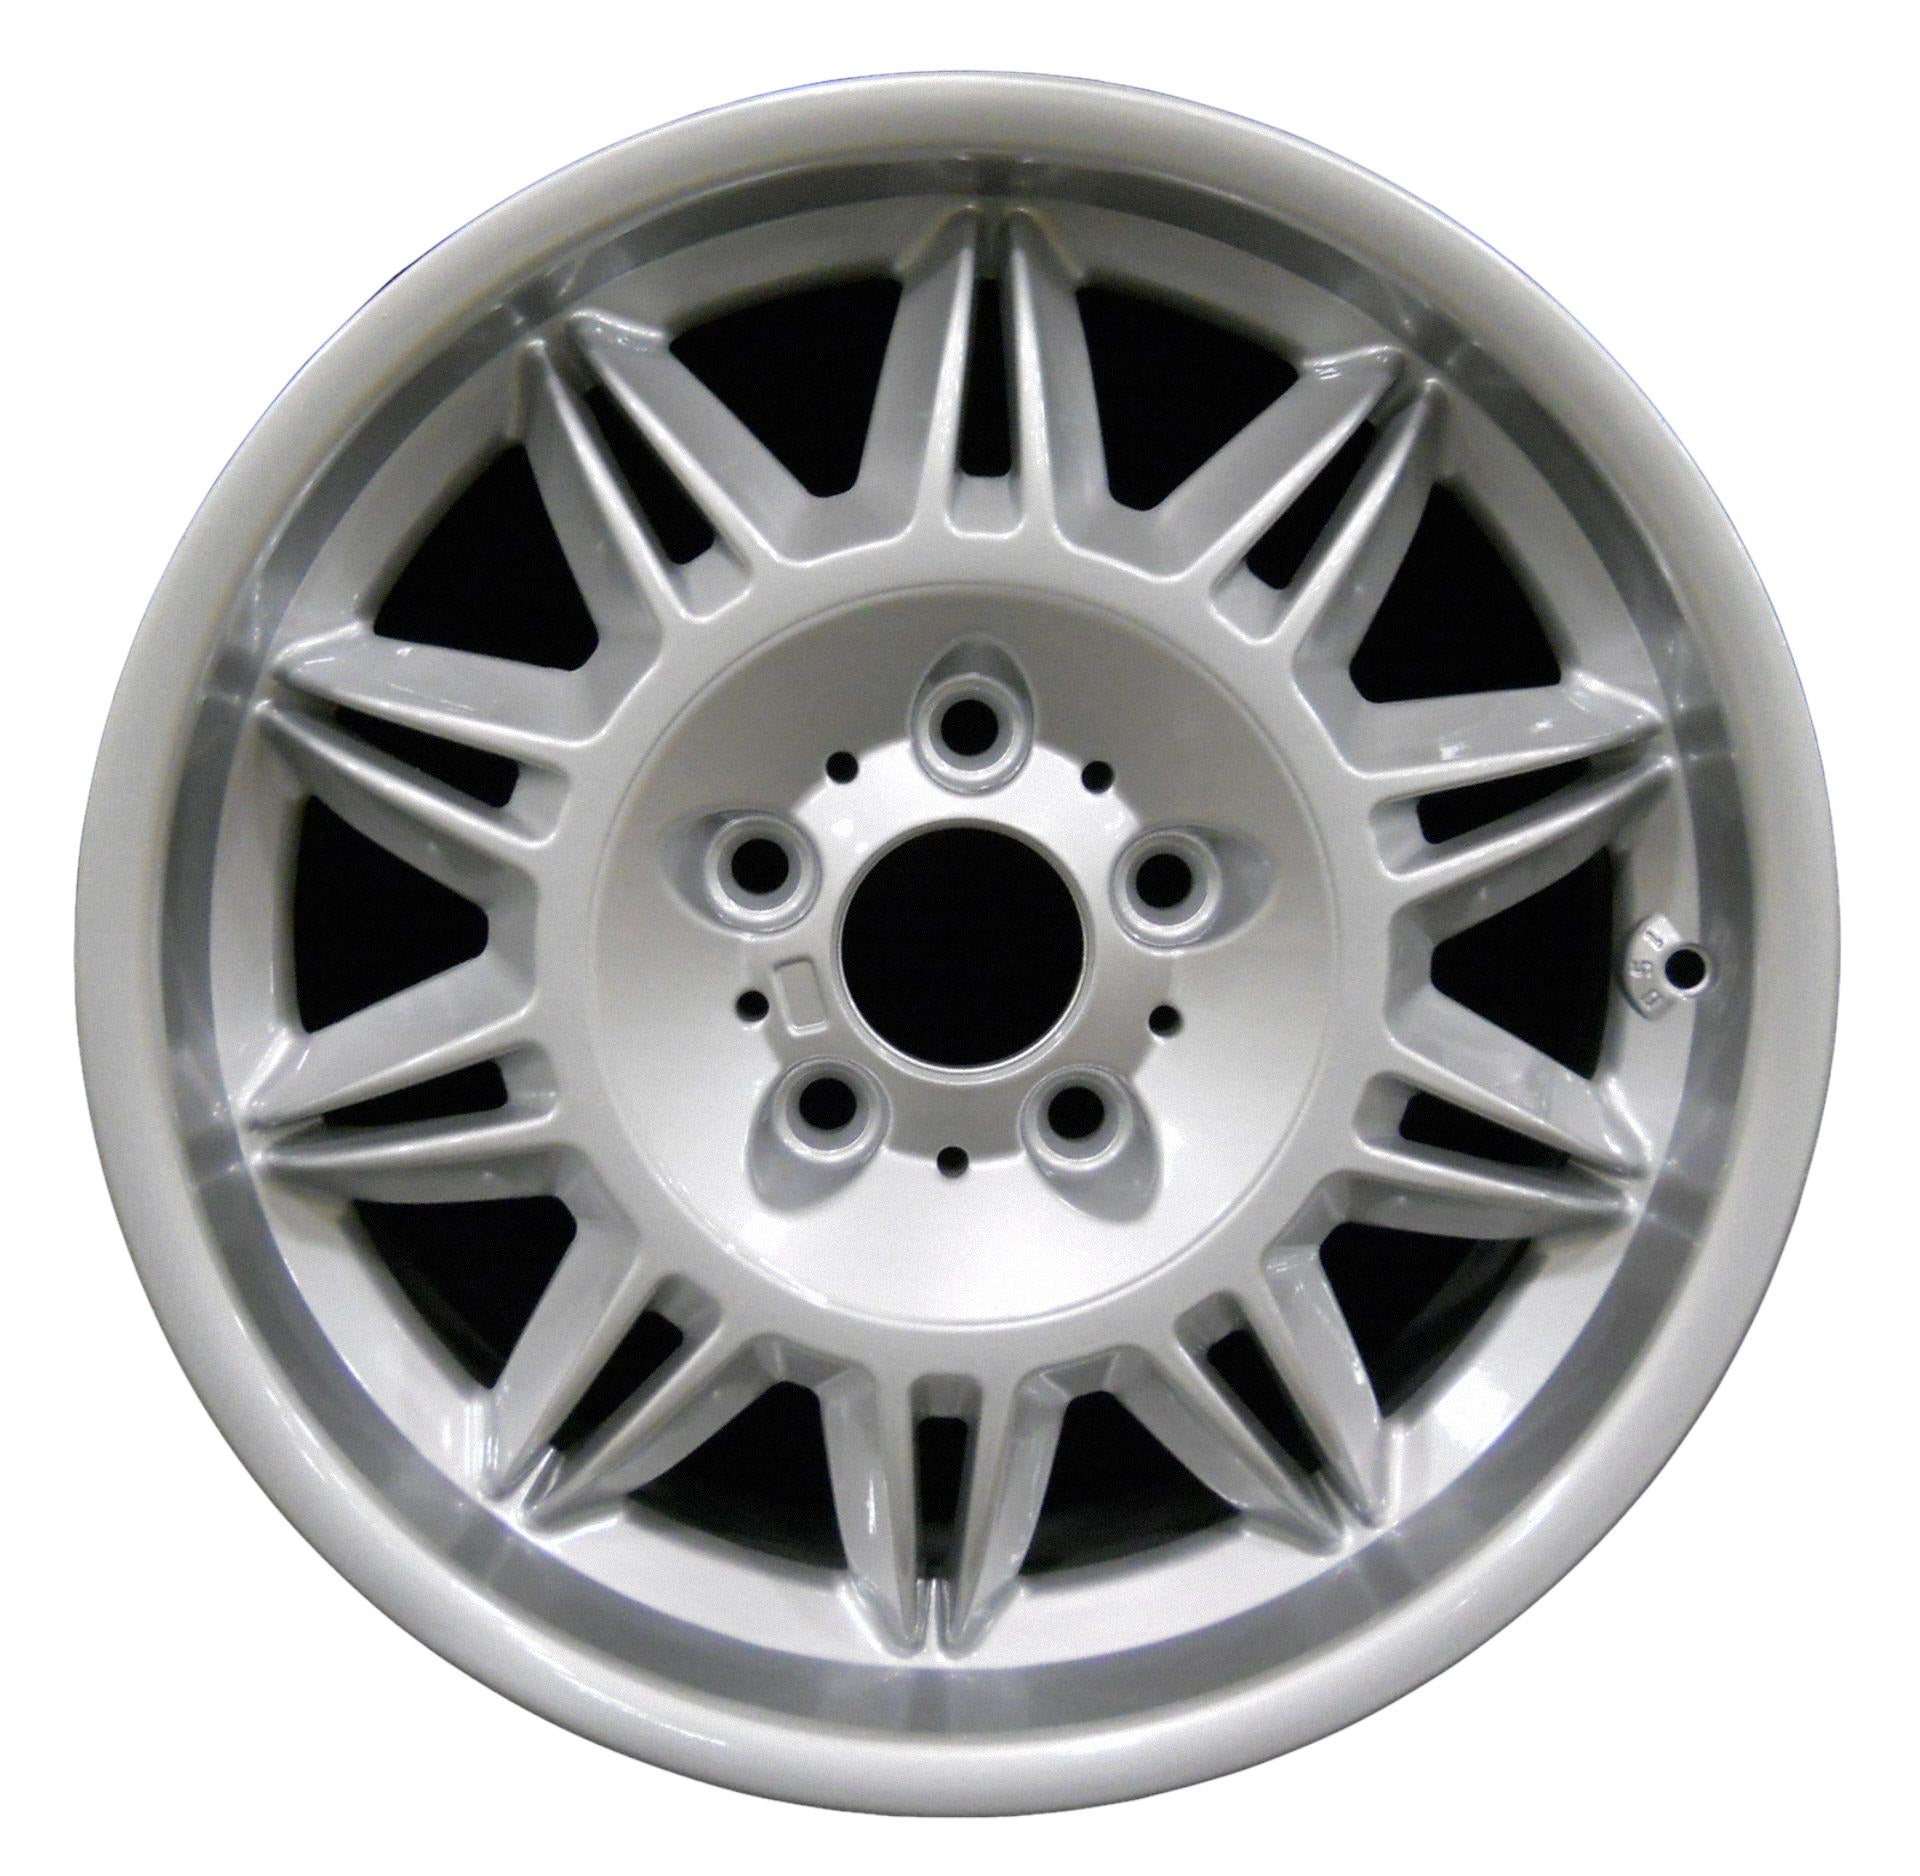 BMW M3  1995, 1996, 1997, 1998, 1999, 2000, 2001, 2002 Factory OEM Car Wheel Size 17x8.5 Alloy WAO.59301RE.PS06.FF